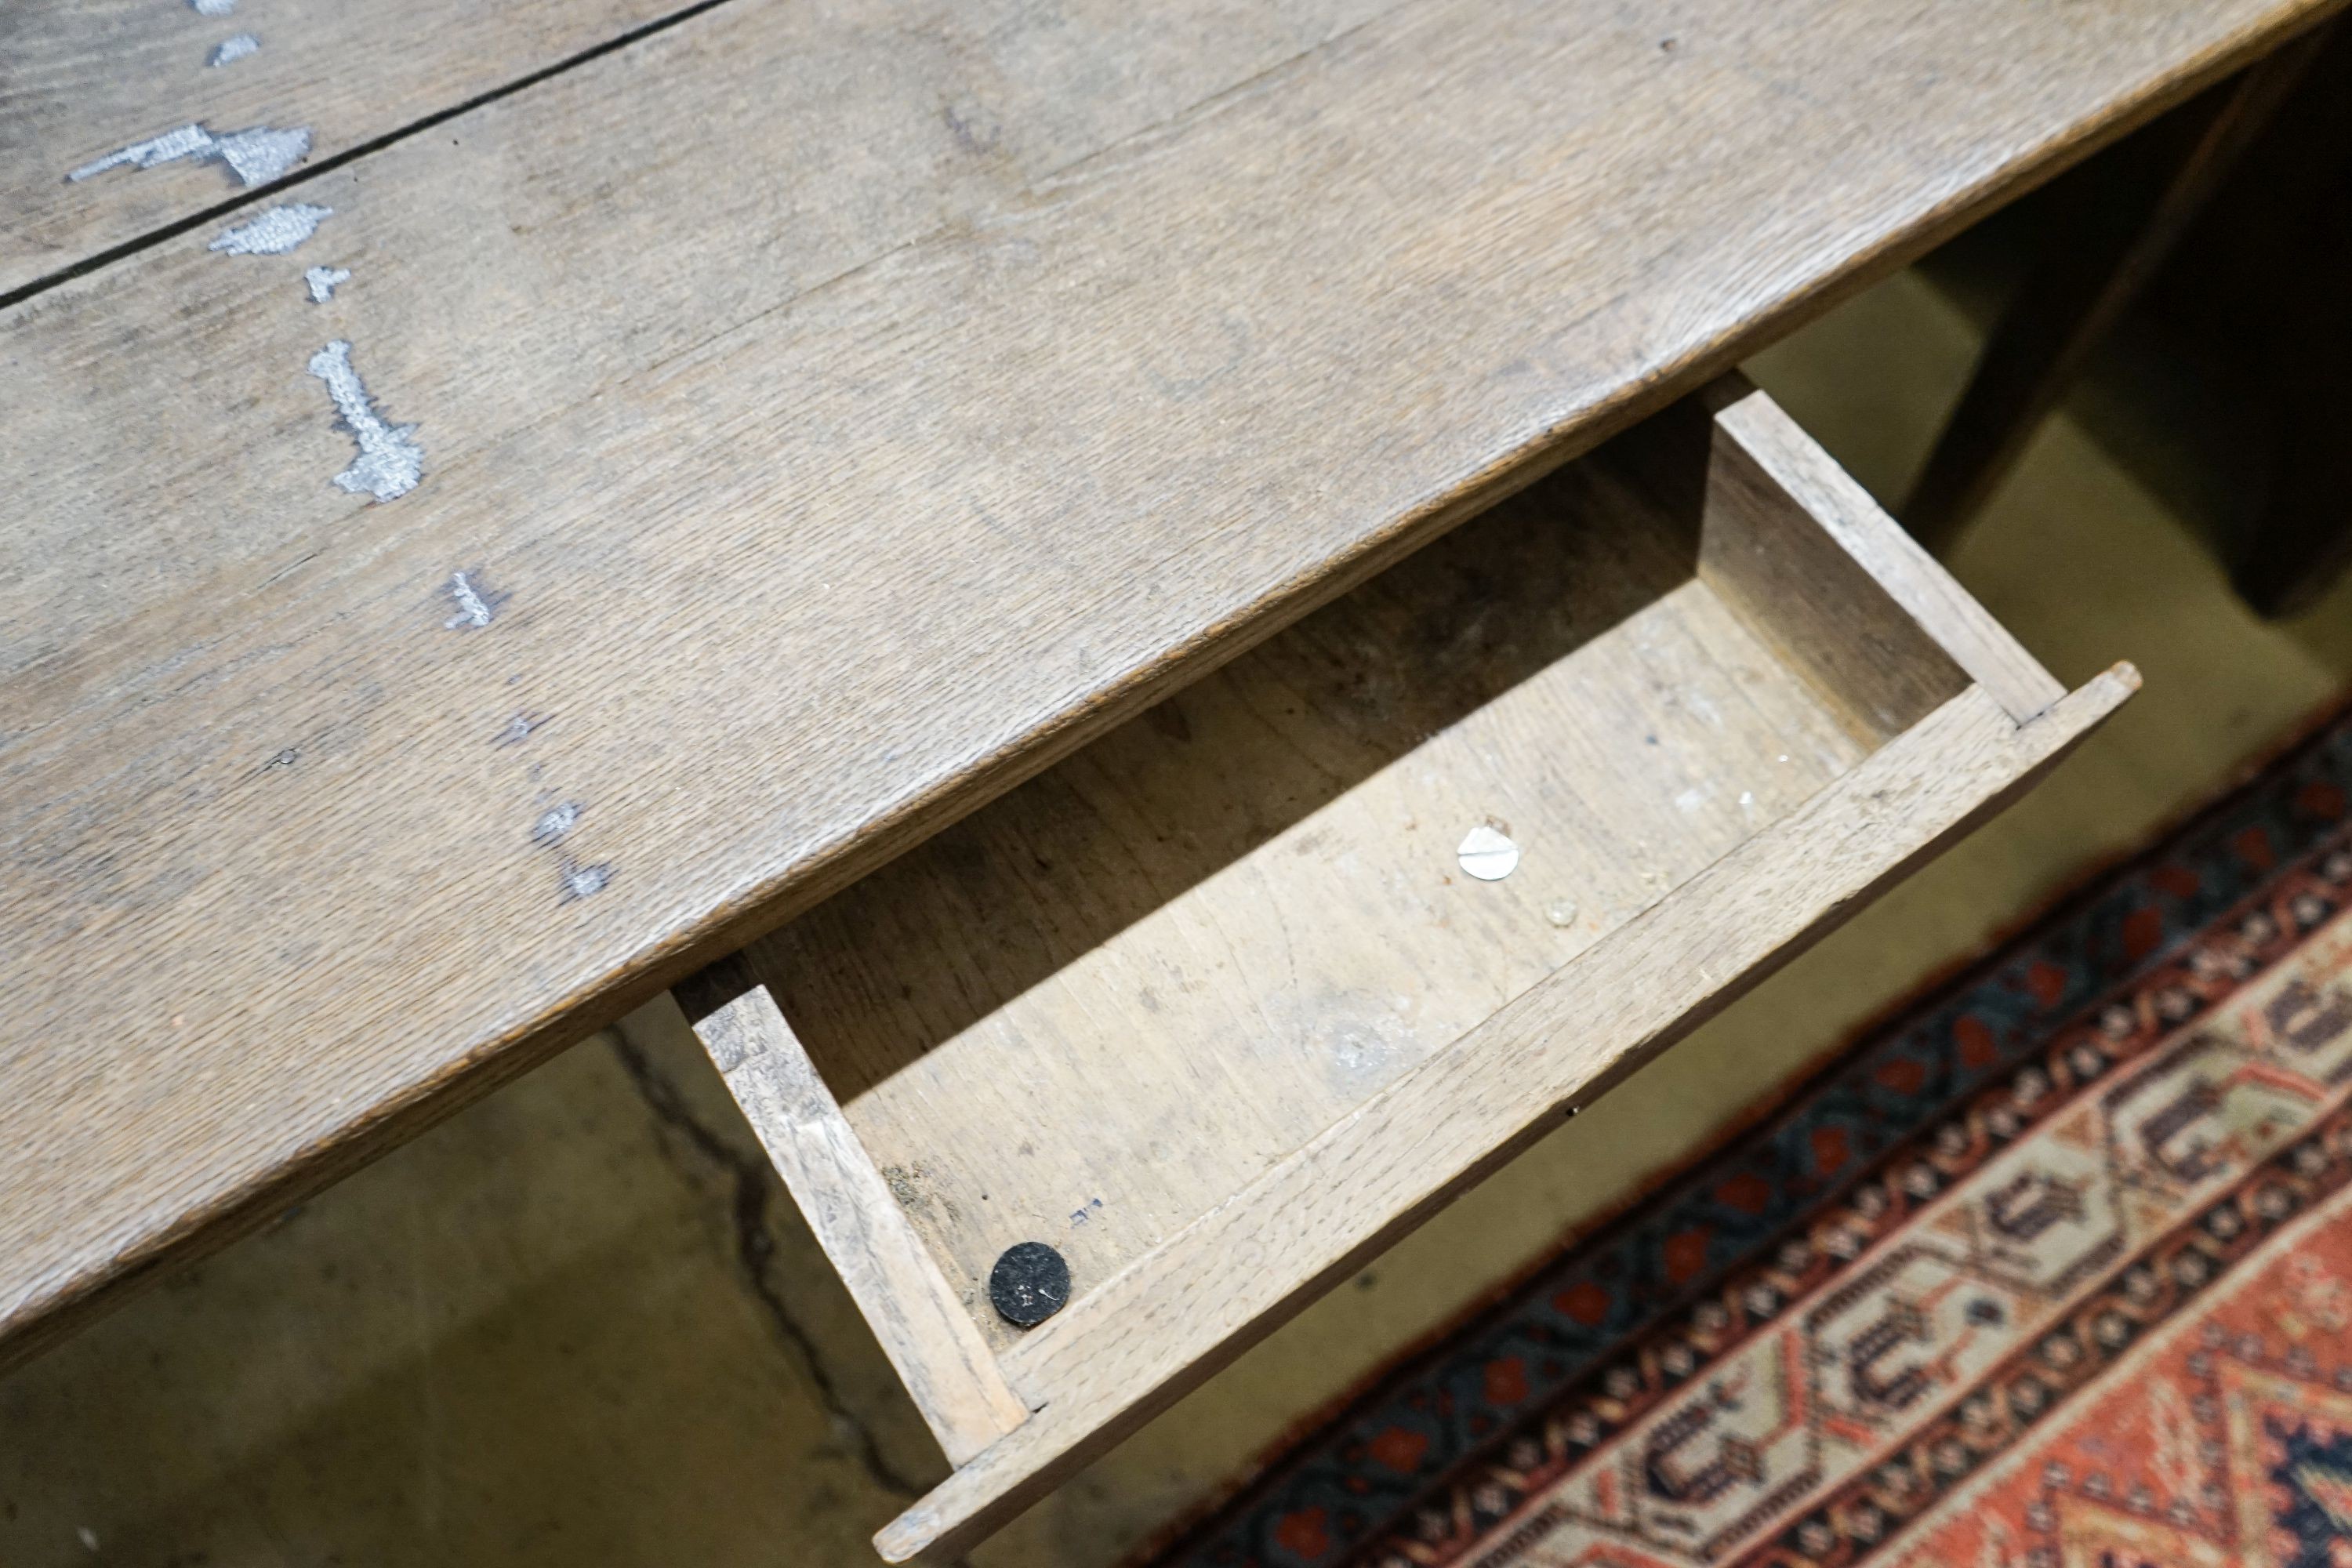 An early 19th century French provincial oak farmhouse table, fitted drawer, length 175cm, depth 86cm, height 73cm